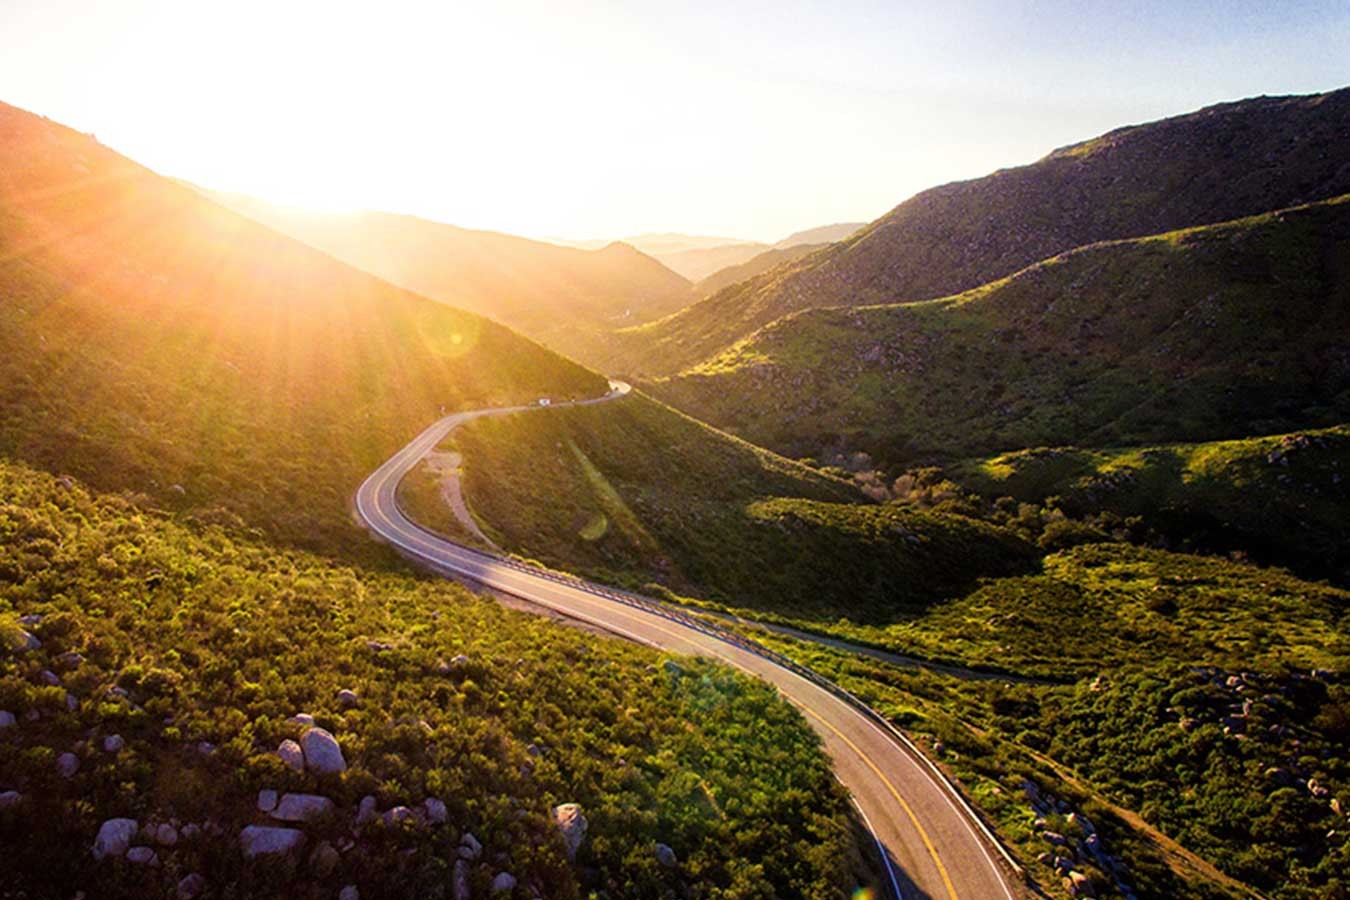 Picture of sunshine breaking over hills into a rural valley with a two lane winding road